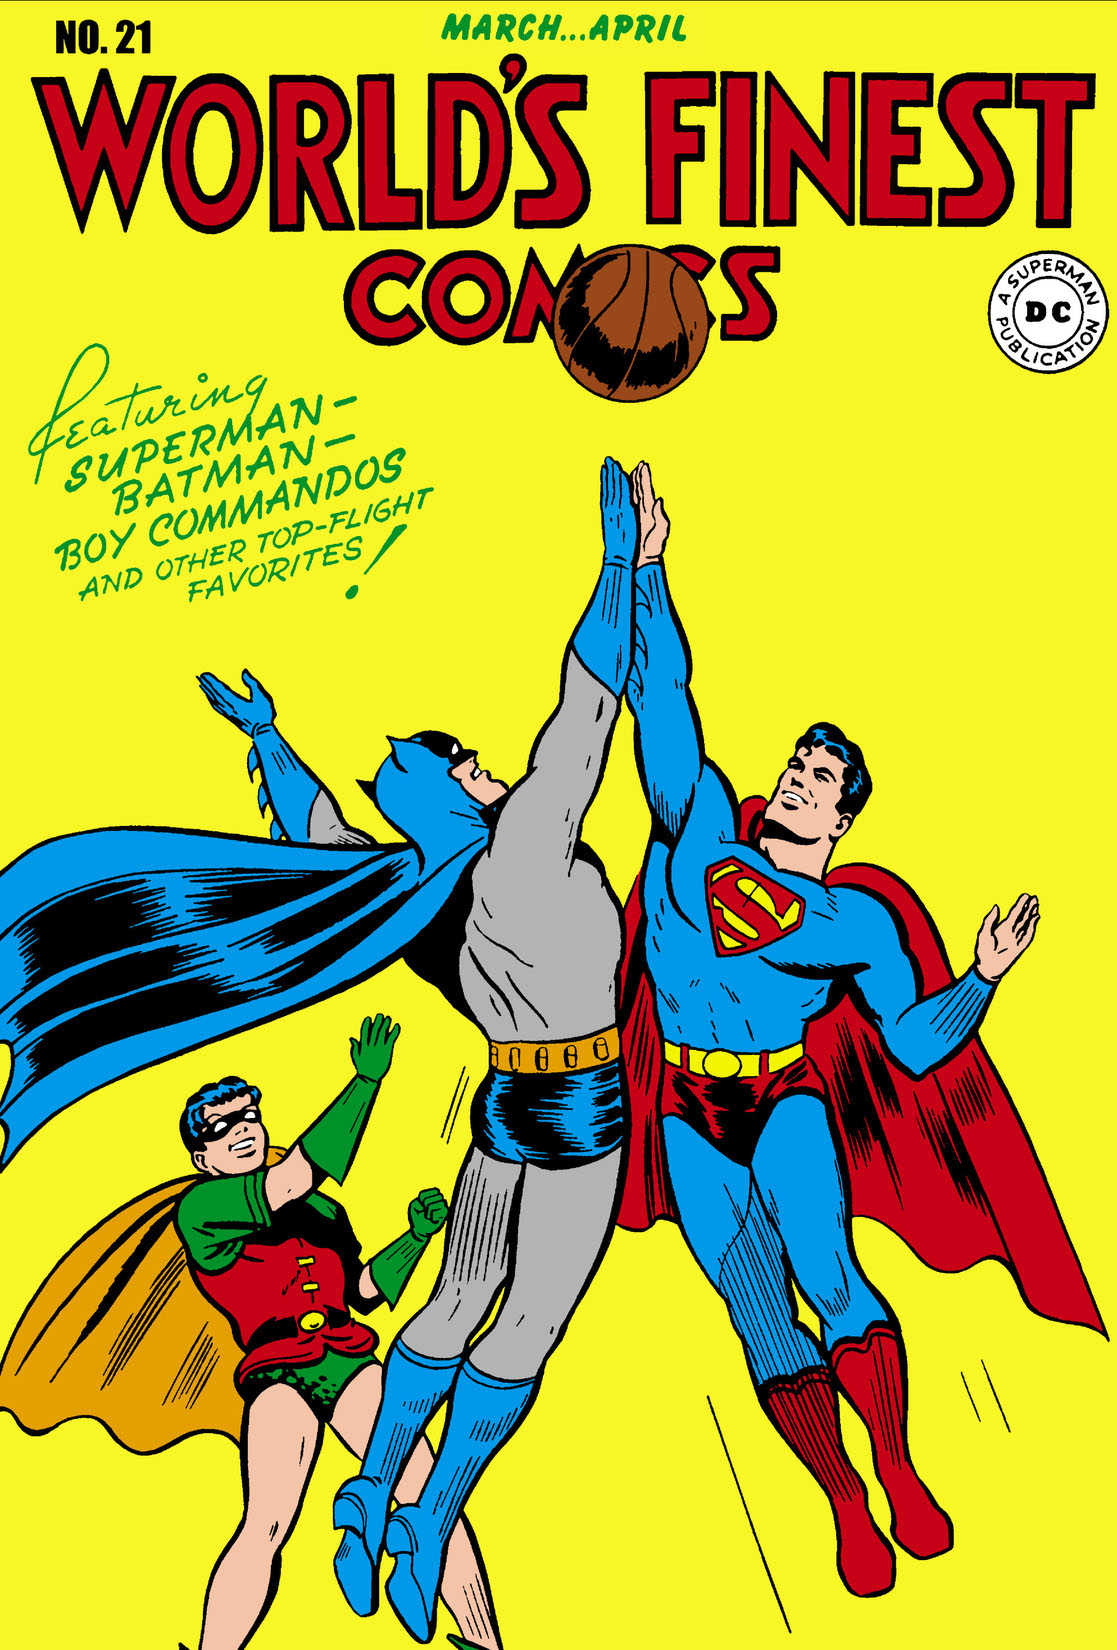 World's Finest Comics (1941-1986) #21 preview images